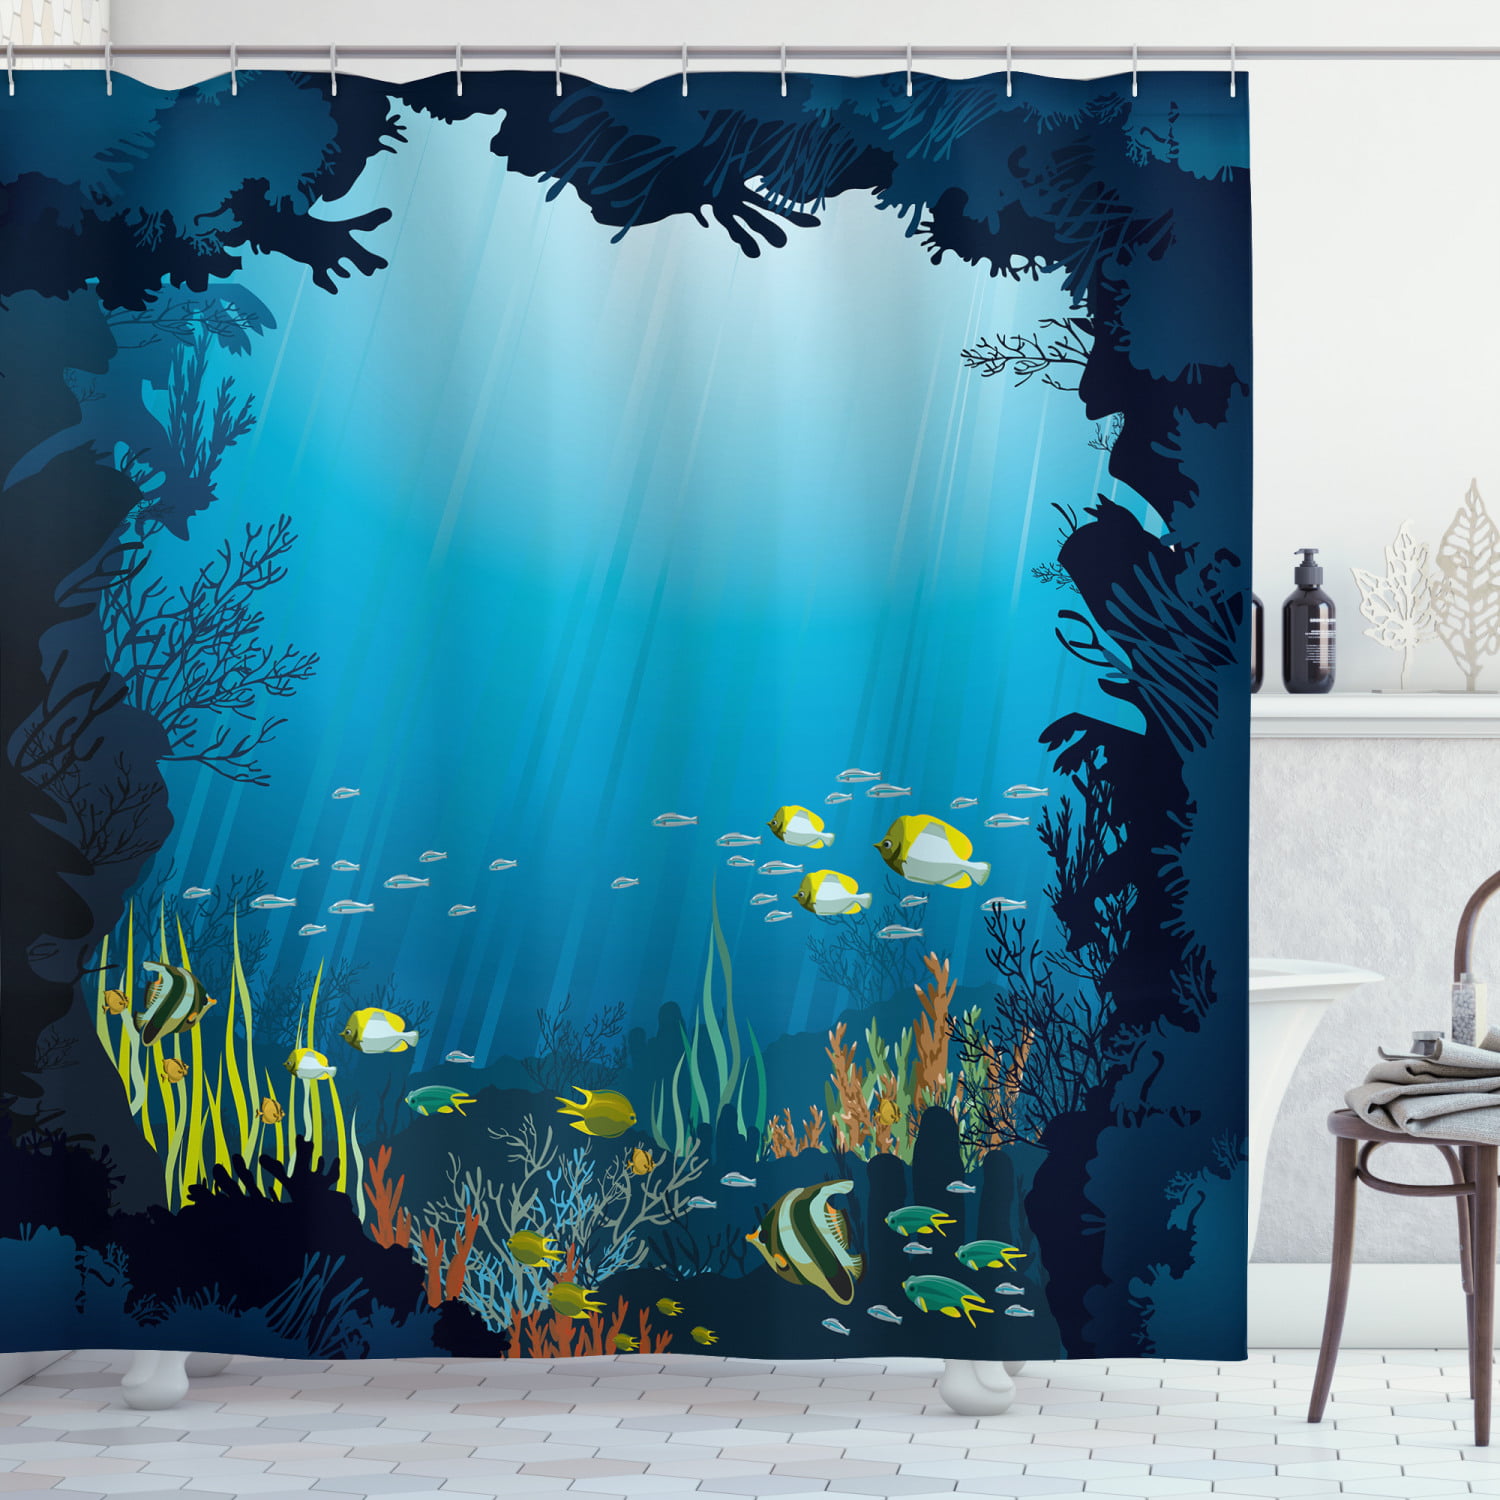 Details about   Seabed Ocean Life Colorful Fishes & Corals Shower Curtain Set Bathroom Decor 72" 